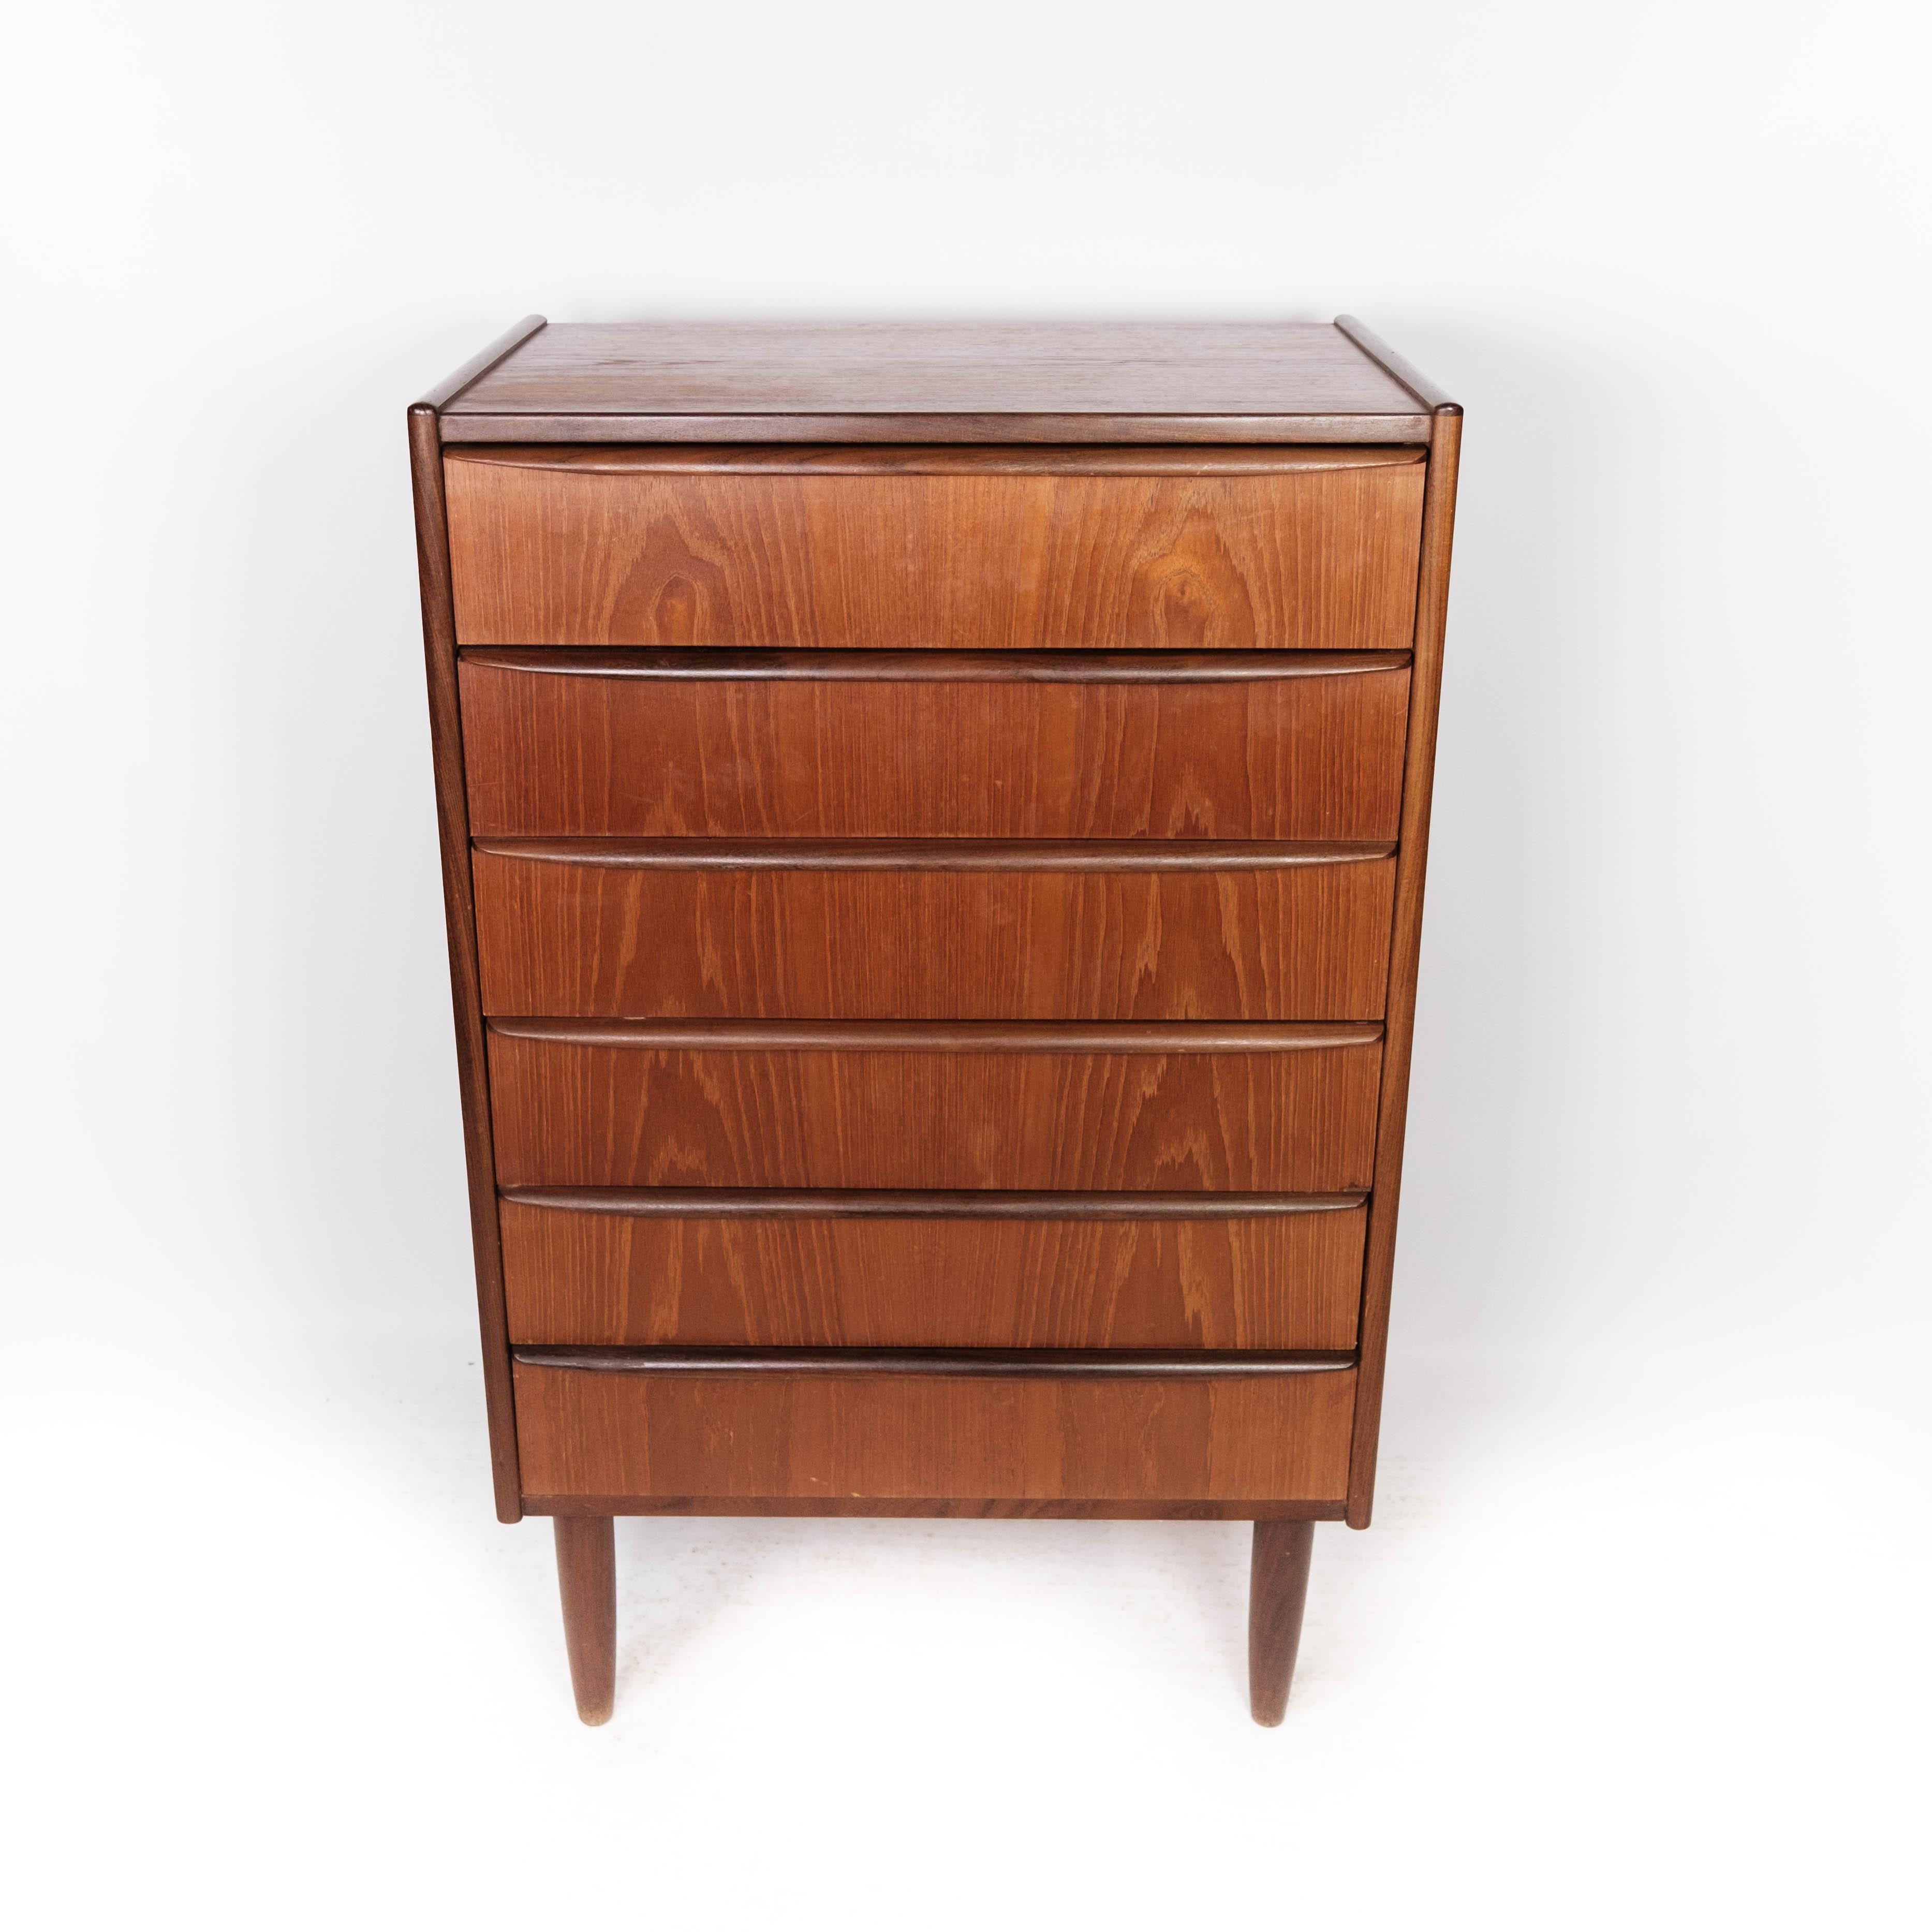 Chest of drawers in teak with six drawers, of Danish design from the 1960s. The chest is in great vintage condition.